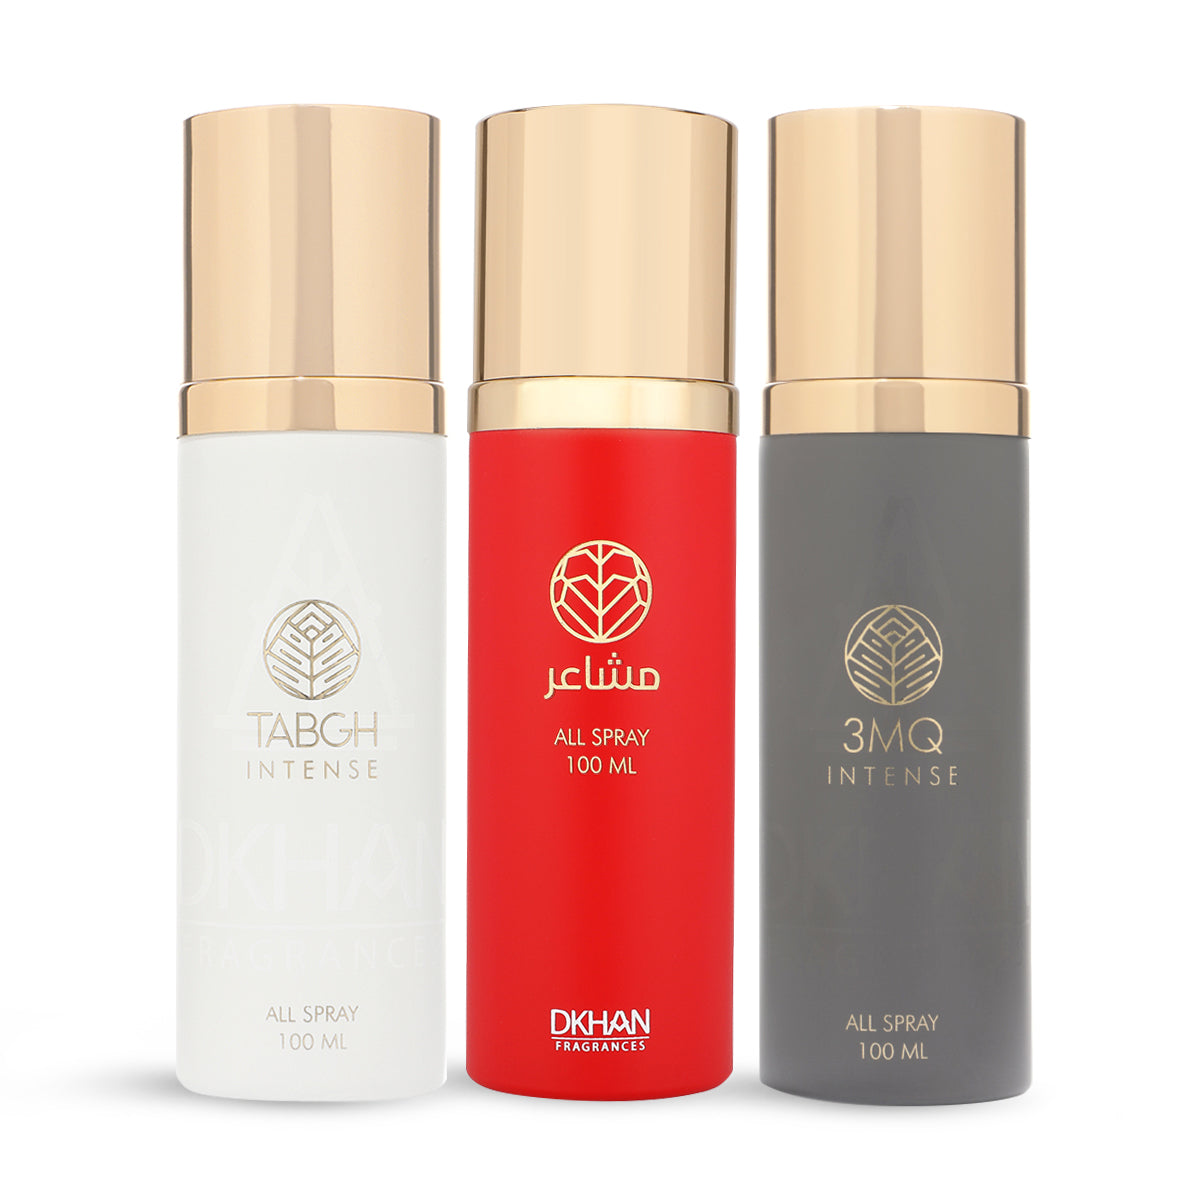 This image displays a trio of All Over Spray bottles from DKHAN Fragrances, each containing 100 ml of product. From left to right: the first bottle is white with a gold cap and the 'TABGH INTENSE' label in a clear font; the middle bottle is vibrant red with a gold cap and labeled 'club INTENSE' in white lettering; the third bottle is a dark grey with a gold cap and the '3MQ INTENSE' label. Each bottle features the DKHAN Fragrances logo—a stylized heart within a diamond shape—above the label.